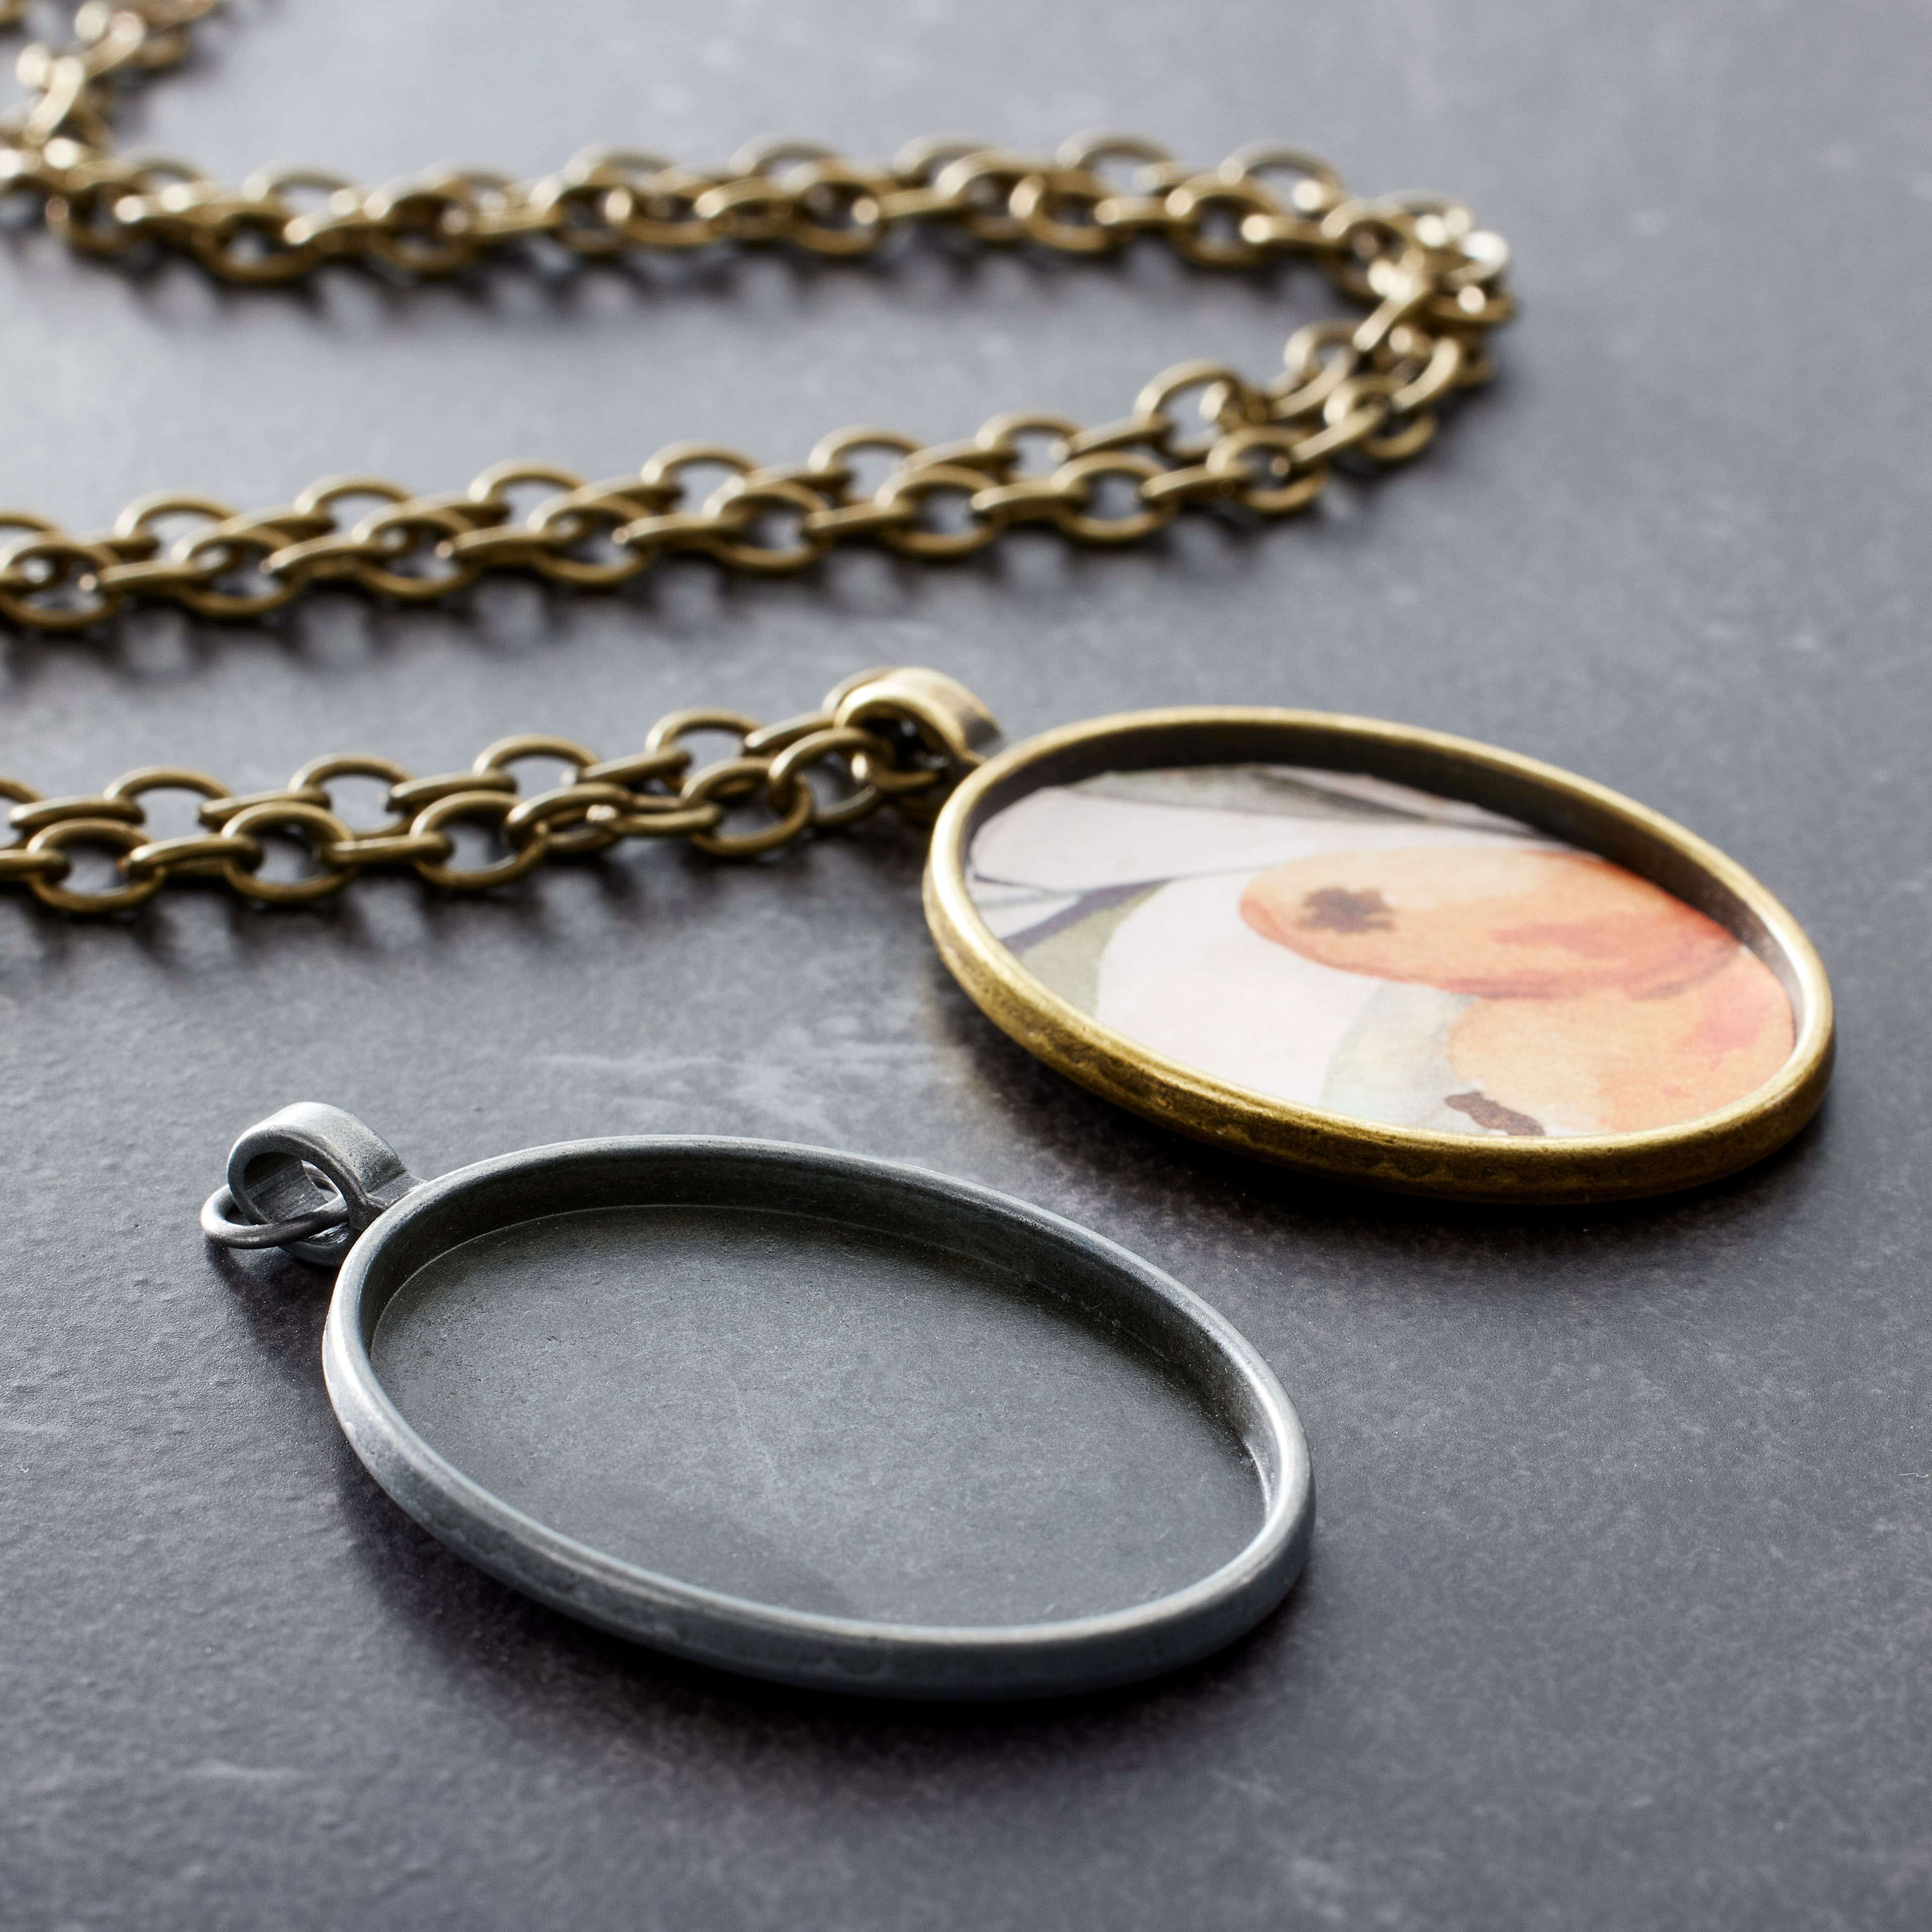 Found Objects&#x2122; Silver &#x26; Gold Oval Frame Pendants by Bead Landing&#x2122;